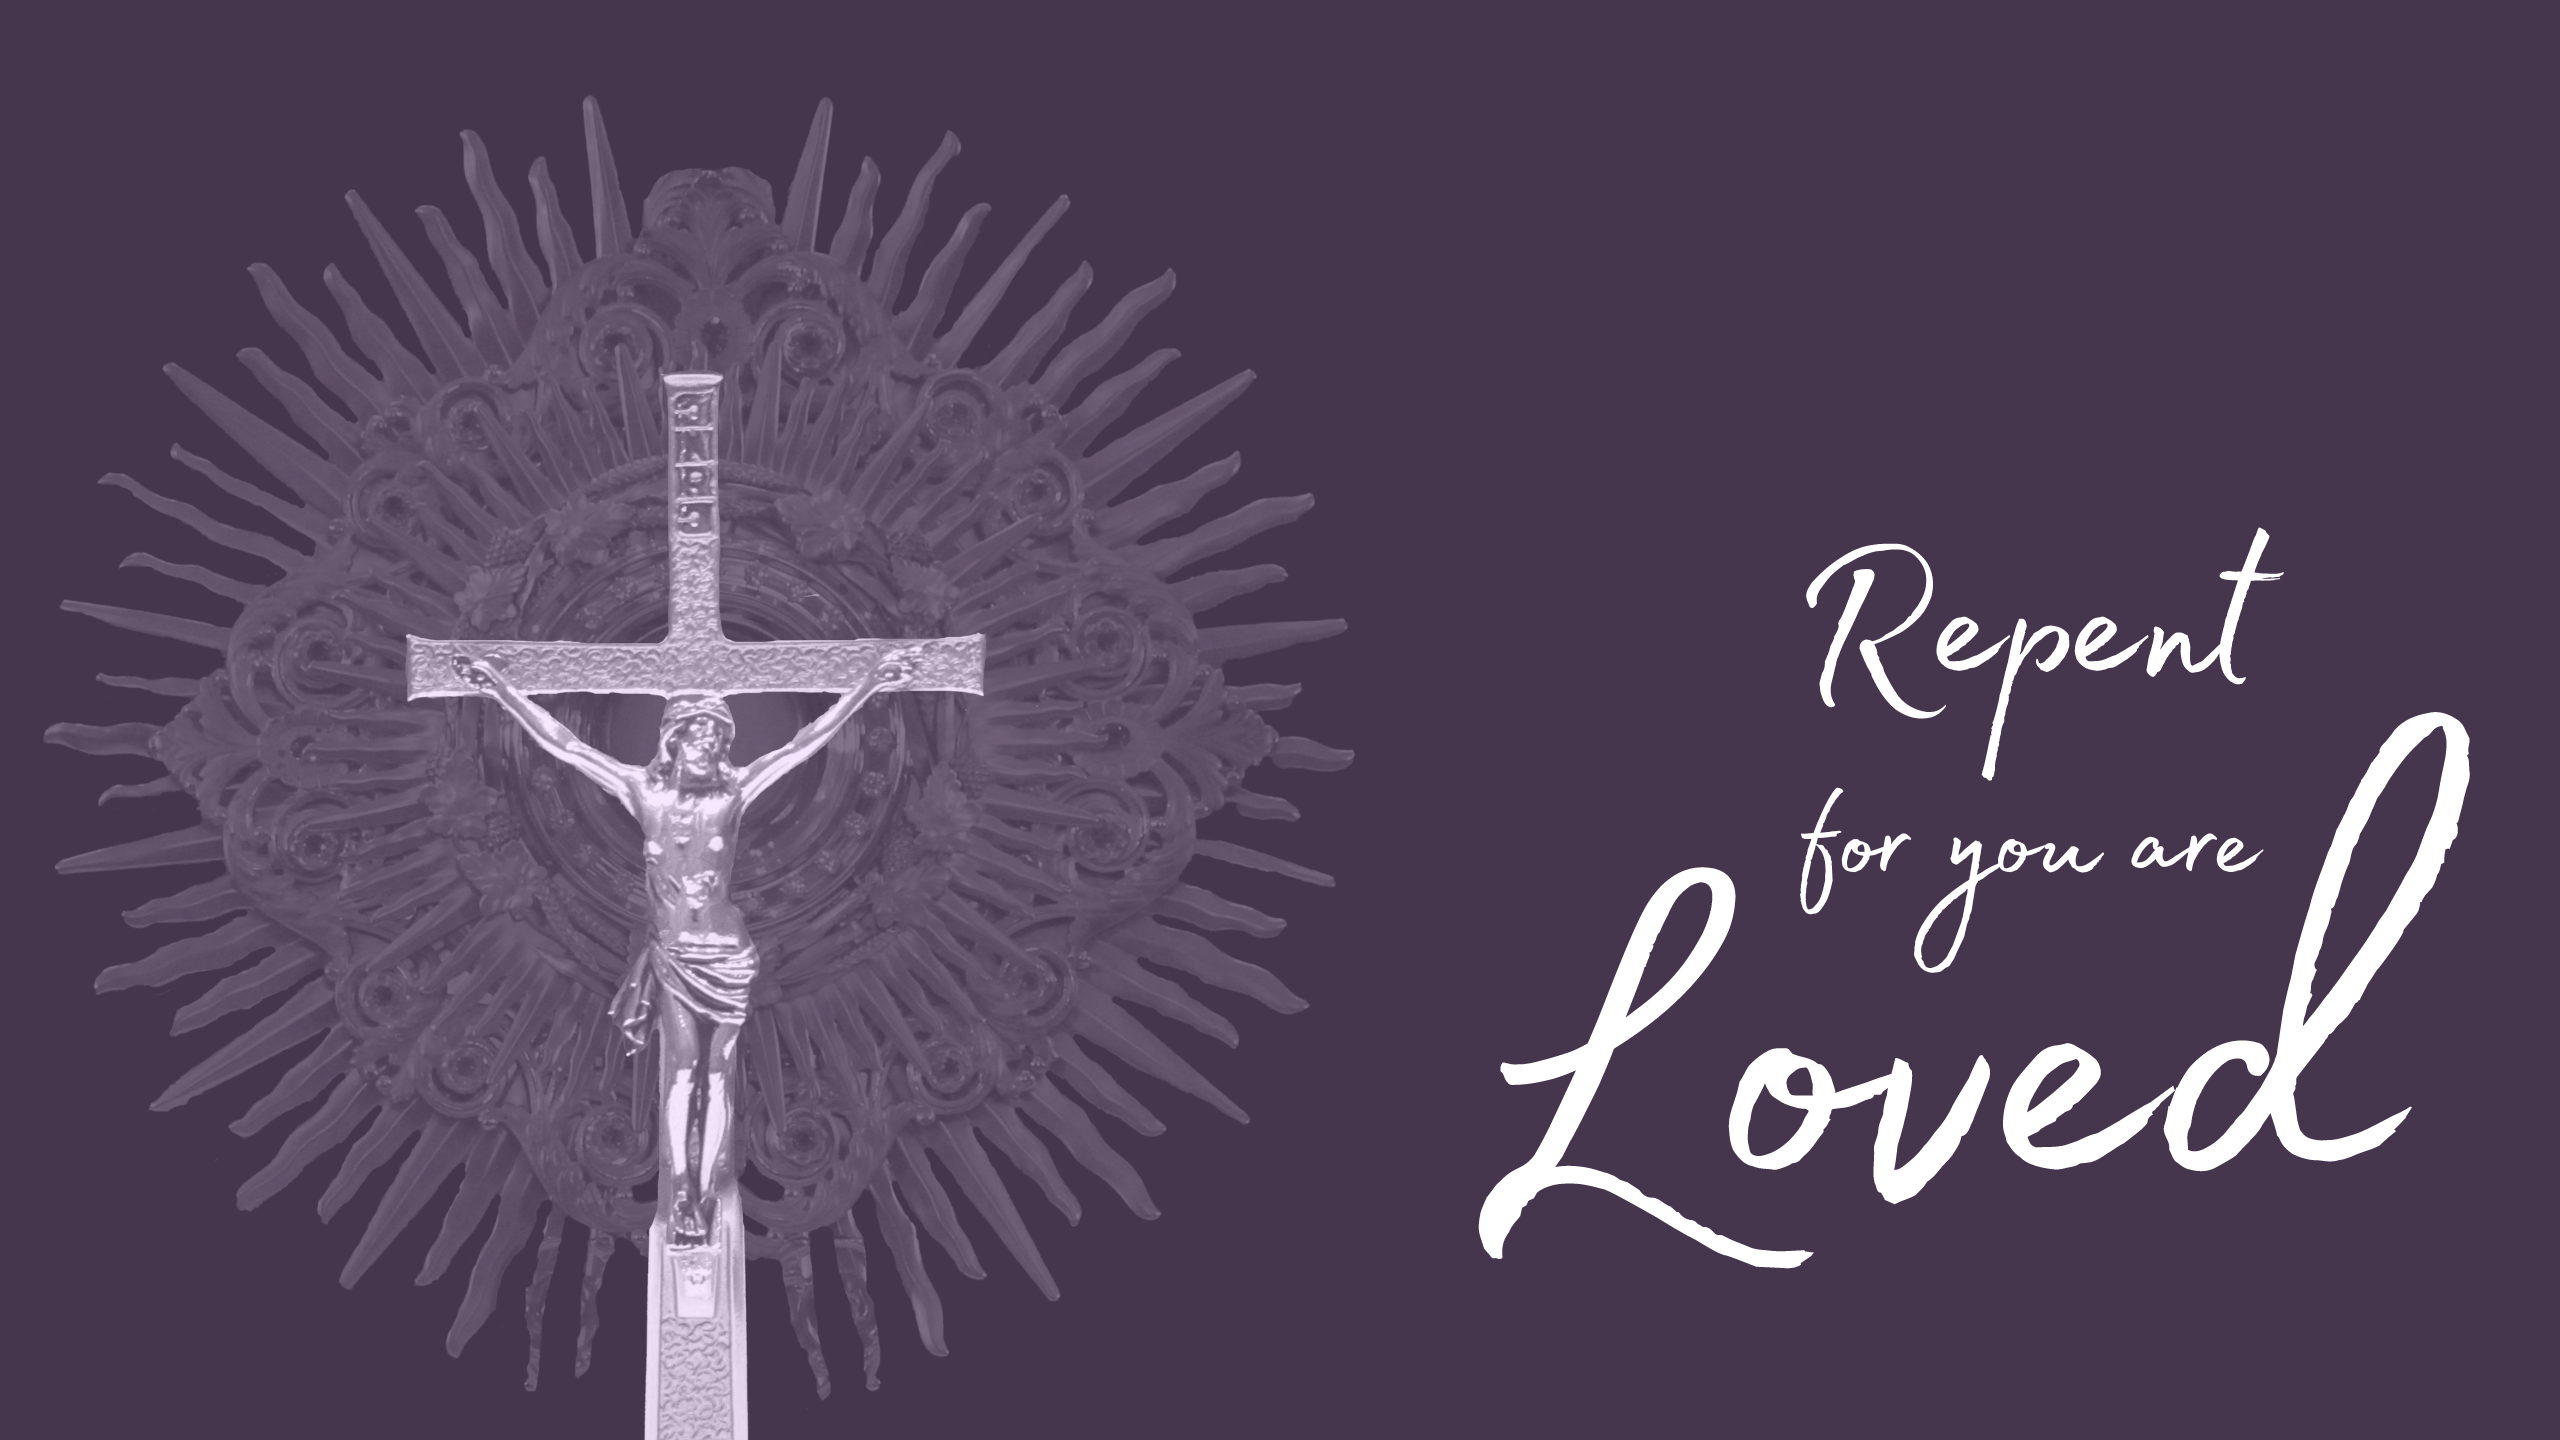 See How He Loves Us Lent 2021 at St. Max